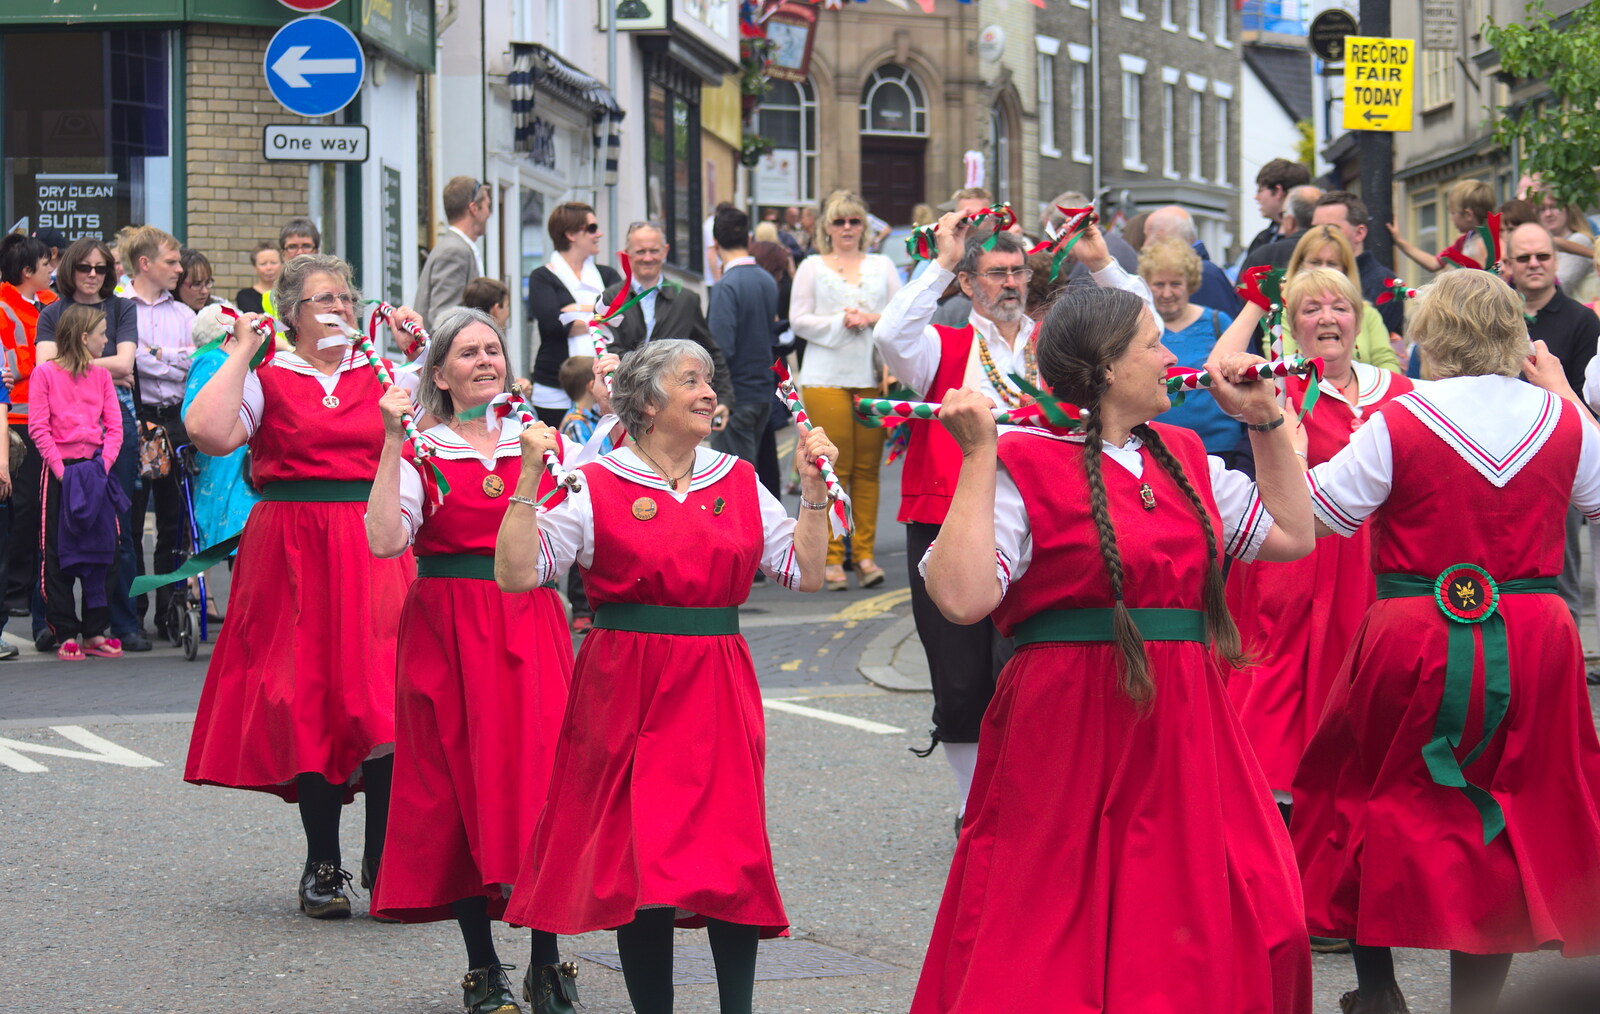 Dancing in the street from Morris Dancing and a Carnival Procession, Diss, Norfolk - 17th June 2012